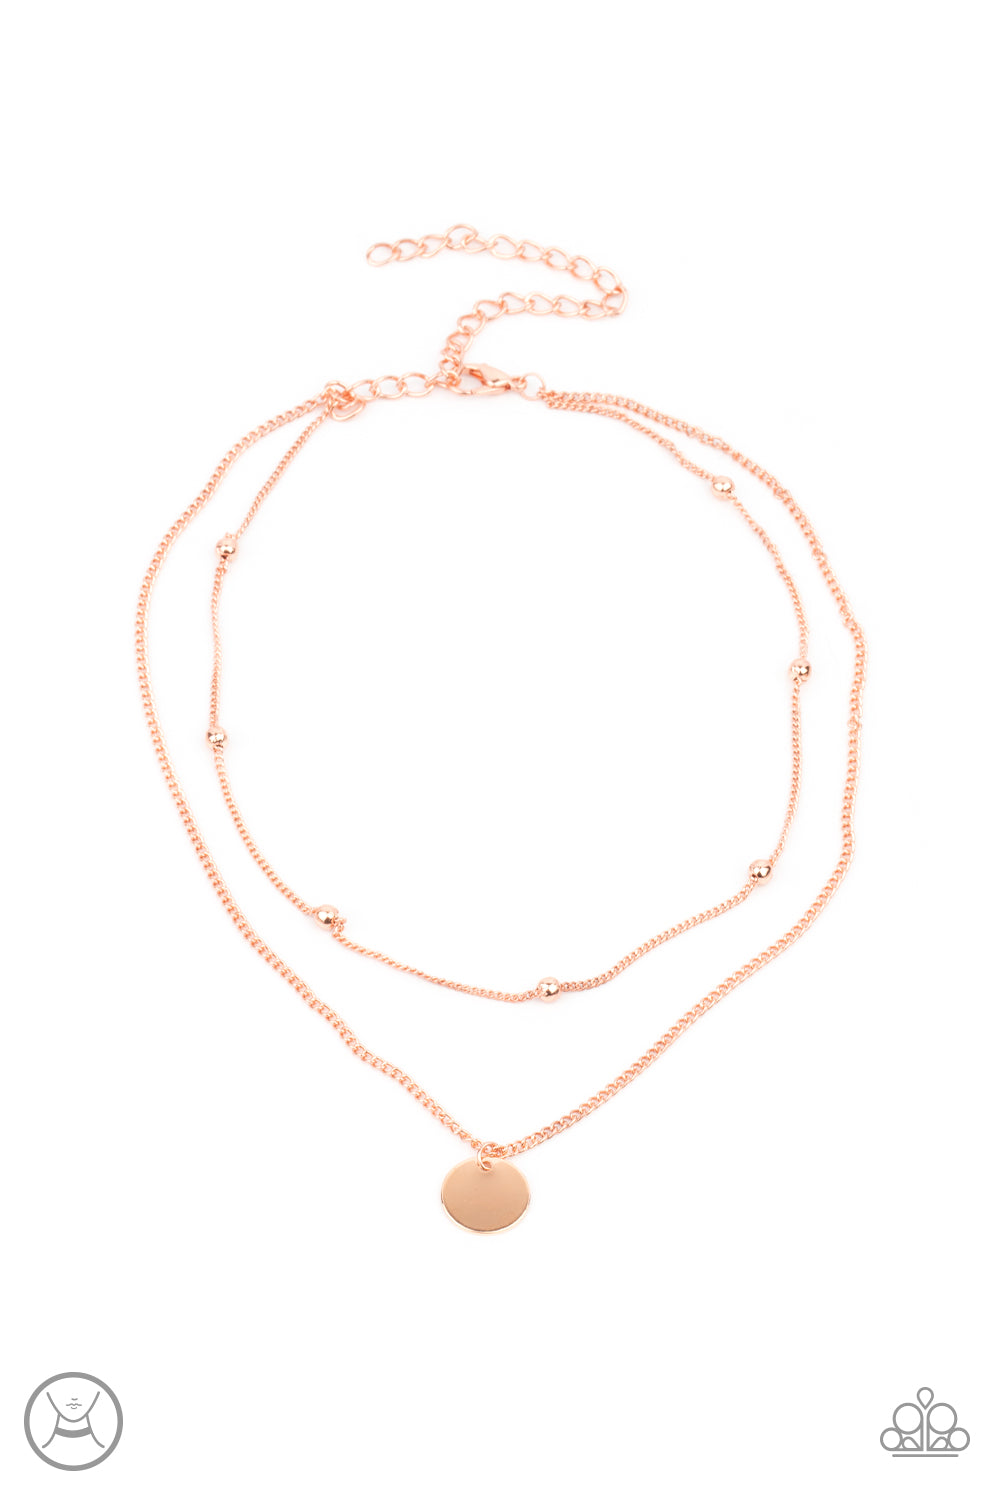 Modestly Minimalist Shiny Copper Choker Necklace - Paparazzi Accessories.  Infused with a shiny copper beaded chain, a dainty shiny copper disc slides along a classic shiny copper chain around the neck, creating sleek layers. Features an adjustable clasp closure.  ﻿﻿﻿All Paparazzi Accessories are lead free and nickel free!  Sold as one individual choker necklace. Includes one pair of matching earrings.